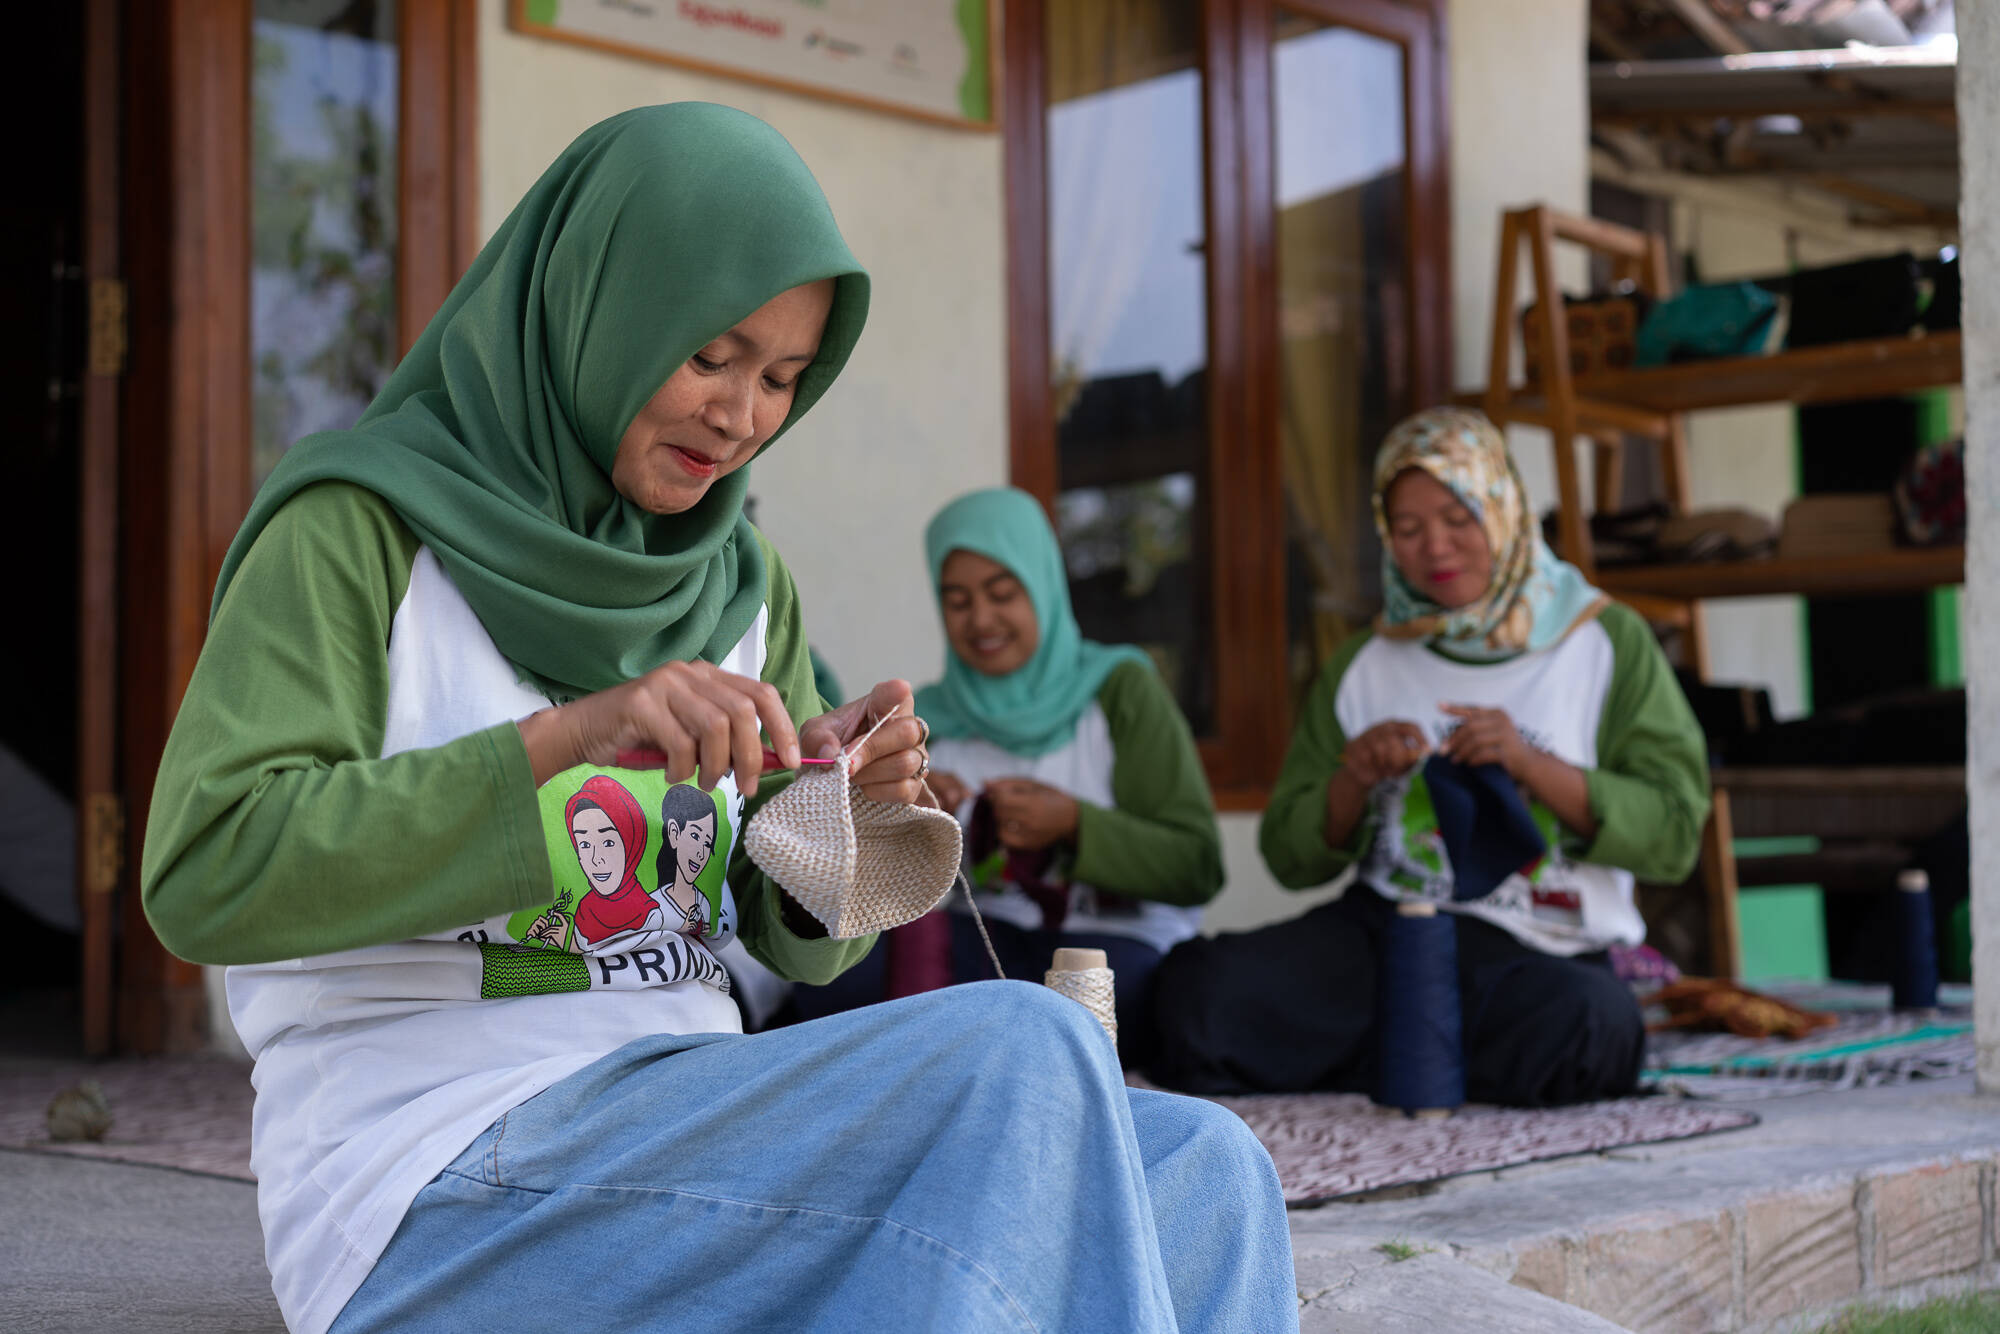 Hartini, a woman from Pungpungan Village, Bojonegoro, East Java, has been joining the Crochet Training for Community (PRIMA) for three years. A lot of training makes her an expert in creating crochet crafts. Moreover, her products have been purchased by a company in large quantities.